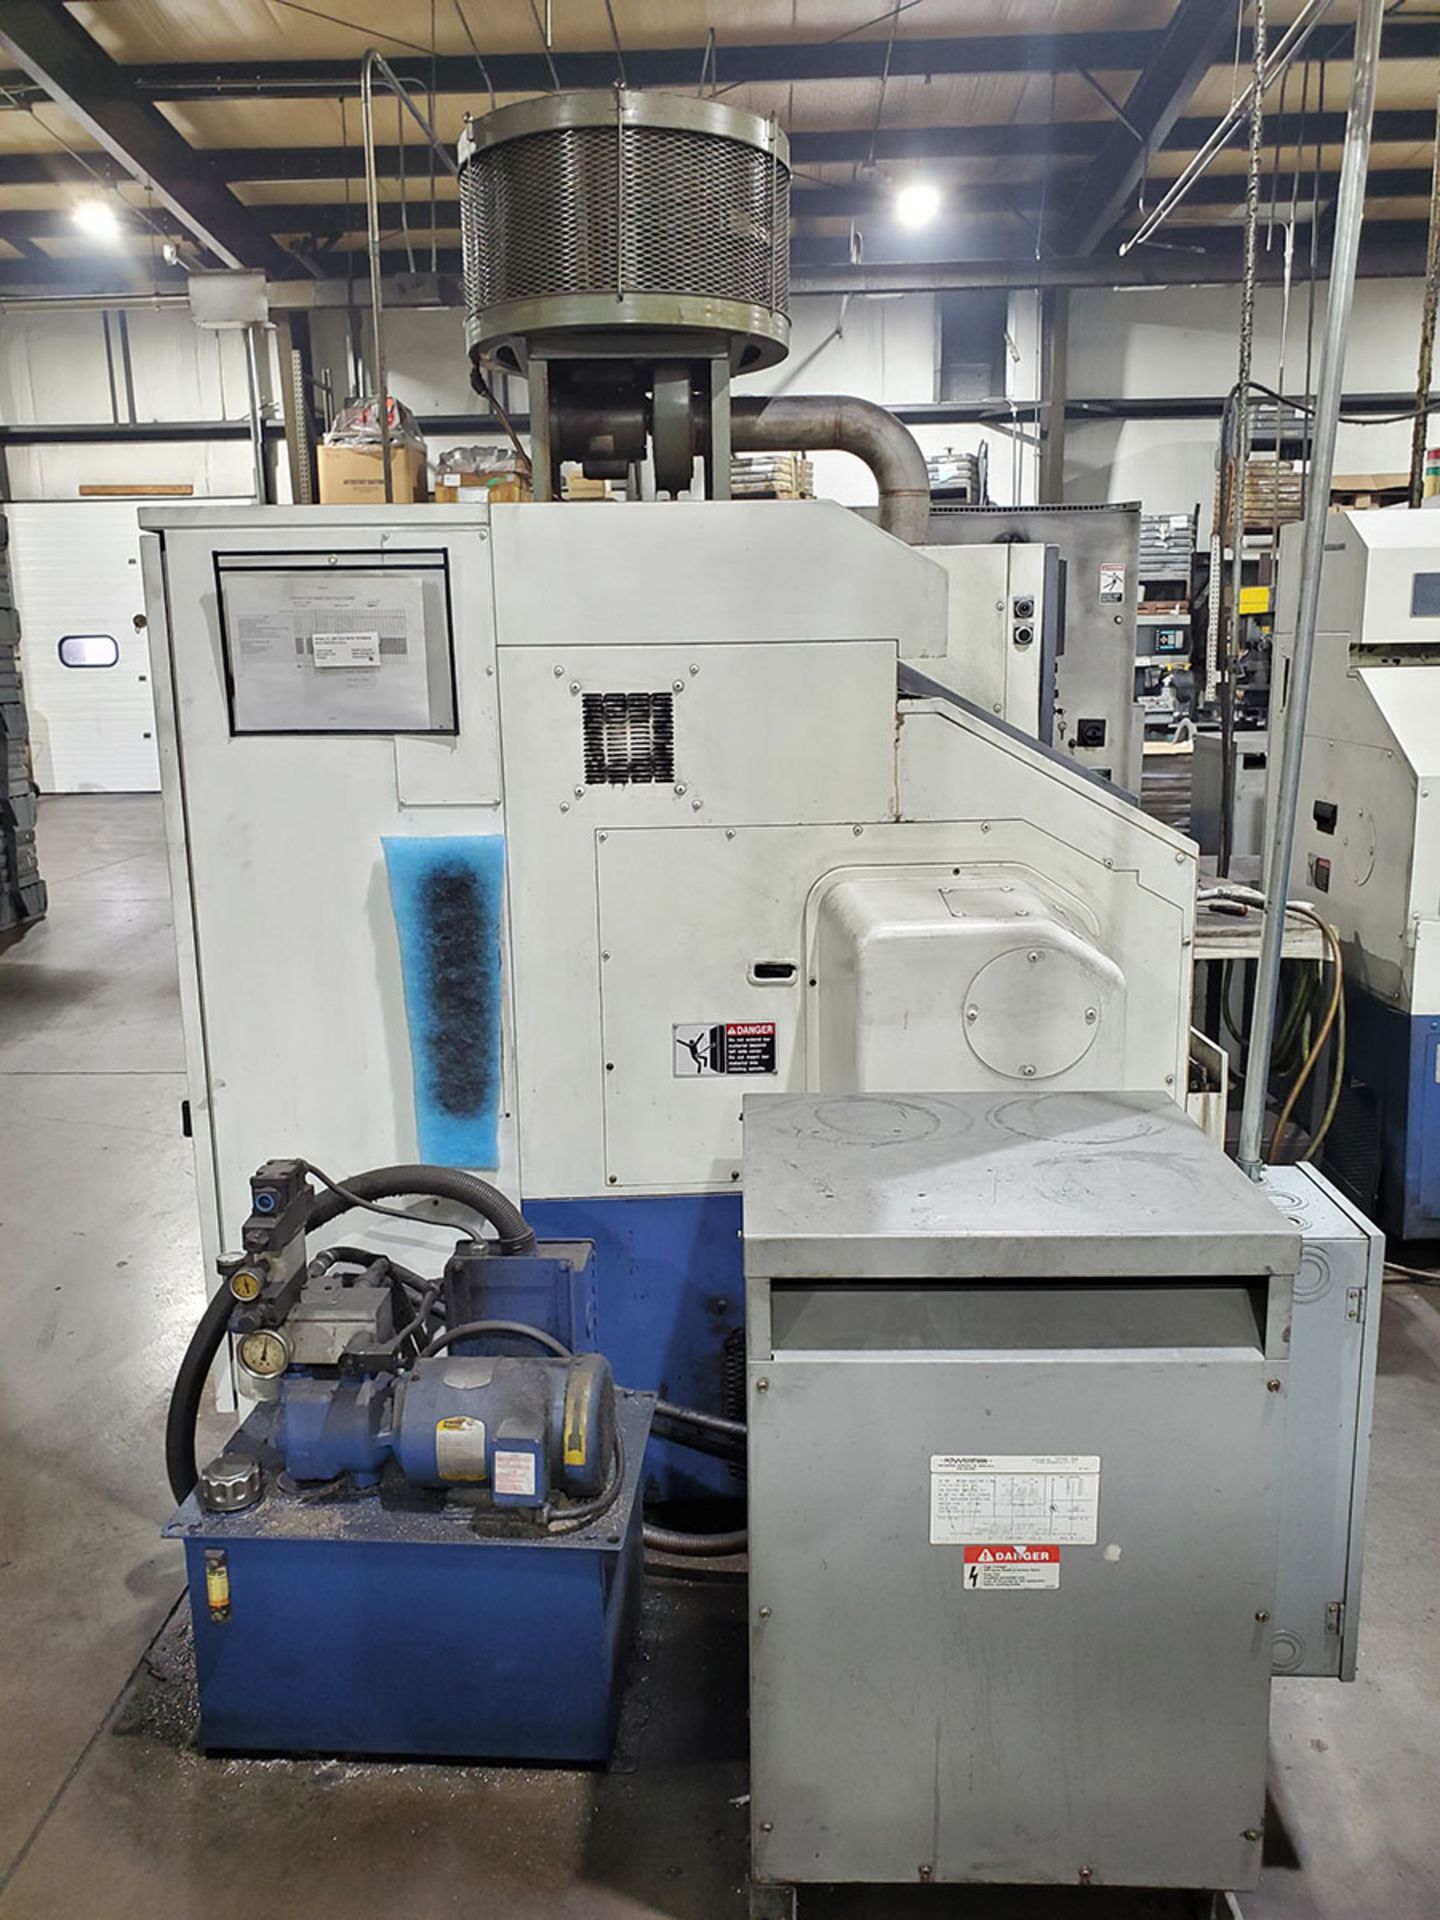 MORI-SEIKI CNC LATHE, MSC-803 DRO CNC CONTROL, MIST COLLECTOR, TURBO OUTFEED INCLINE CHIP - Image 9 of 16